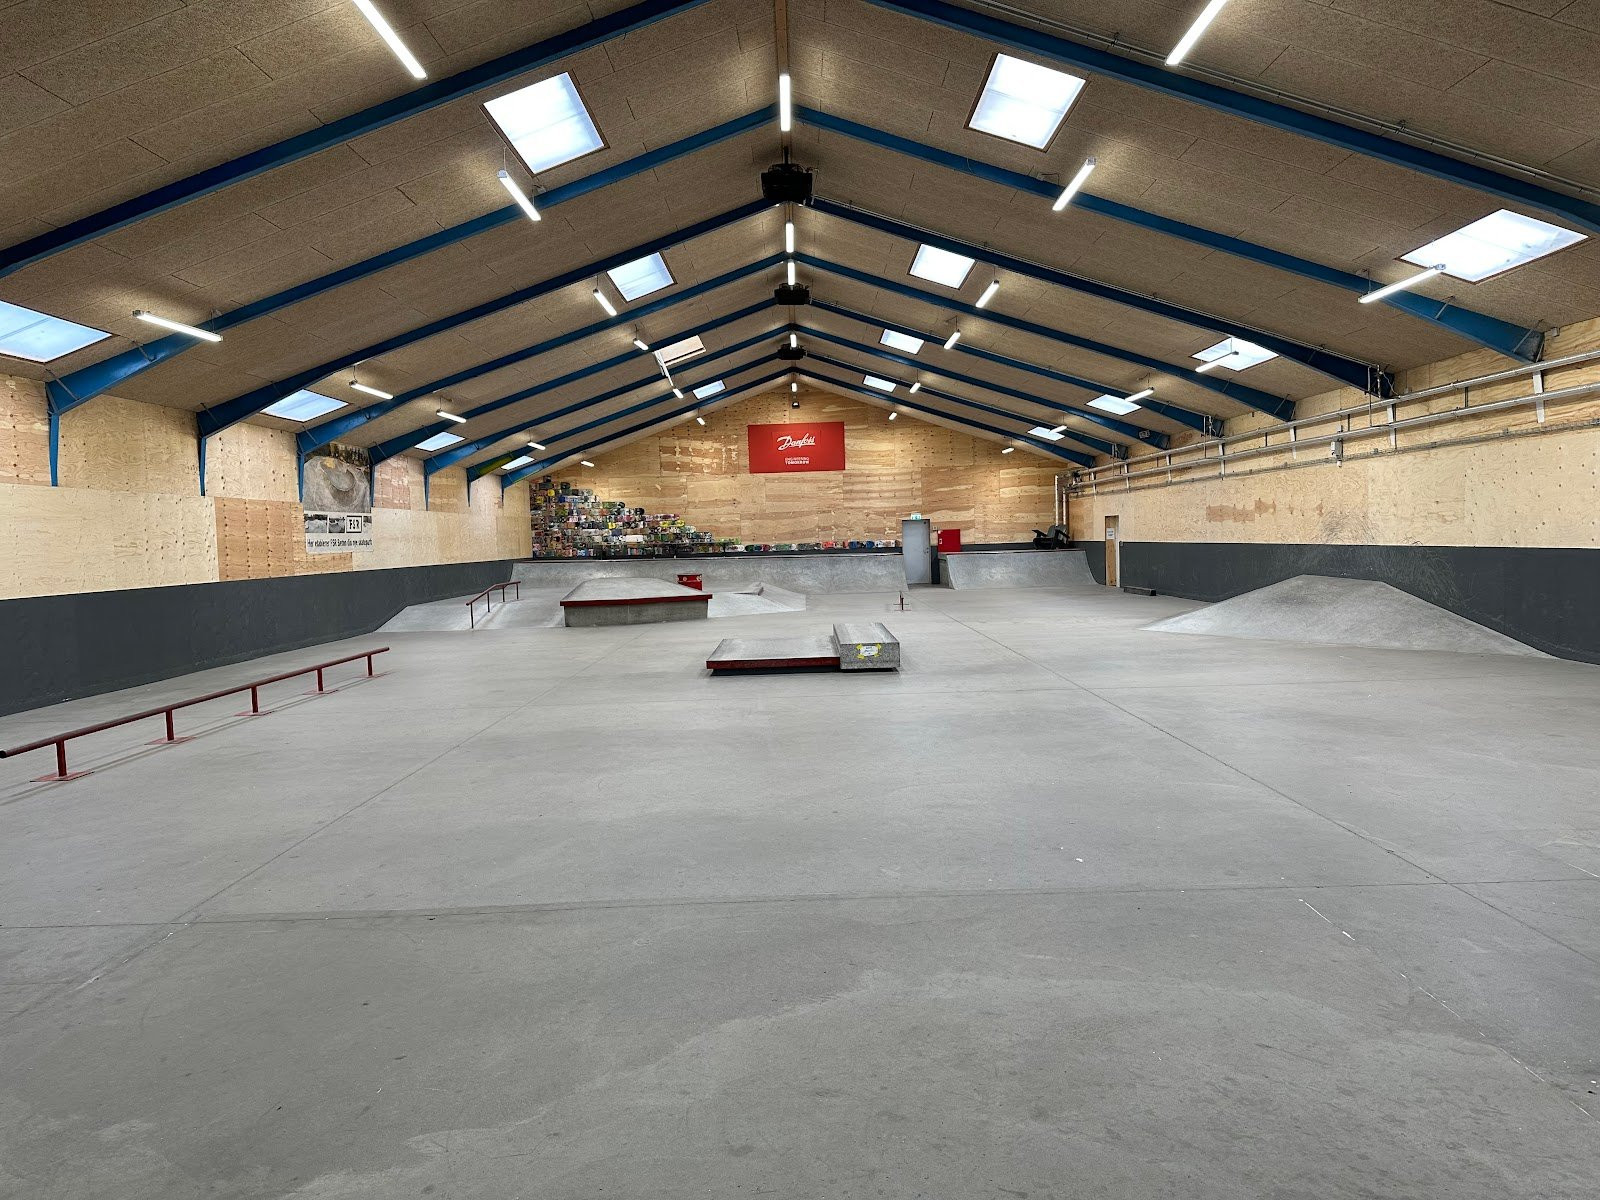 Sønderborg Skatepark is probably the largest indoor park in Southern Jutland. The park has everything a skater could possibly need and very favourable offers for the members of the park.The park has banks and quarter pipes in each end of the park with obstacles in between. The obstacles meet all needs and includes a pyramid box, a flat bar with kink as well as a fly-out.Surrounding the obstacles is everything from practice rails to grind boxes and manual padsEverything in the park is made of wood and steel and seems to be of a good quality.Sønderborg Skatepark is a little unique as it offers its members a great responsibility. For visitors, the park is only open two days a week (Tuesday and Thursday) for a couple of hours, while the members can enjoy opening hours between 2pm and 10pm on weekdays and between 10am and 10pm on the weekends. Members have a chip so that they can always access the park during opening hours.A locker at Sønderborg skatepark costs 600 DKK half-yearly. Furthermore, there is a registration fee of 100 DKK.For children under the age of 13, the price is 300 DKK half-yearly and 100 DKK for the registration fee.Sønderborg skatepark helps new, inexperienced skaters to get started by offering classes. The duration of the classes vary. If you would like to know more about the classes at Sønderborg Skatepark, please contact them by phone or search for more information on their website (see ‘contact’)You can get in touch with Sønderborg Skatepark and find the newest updates&nbsp;here